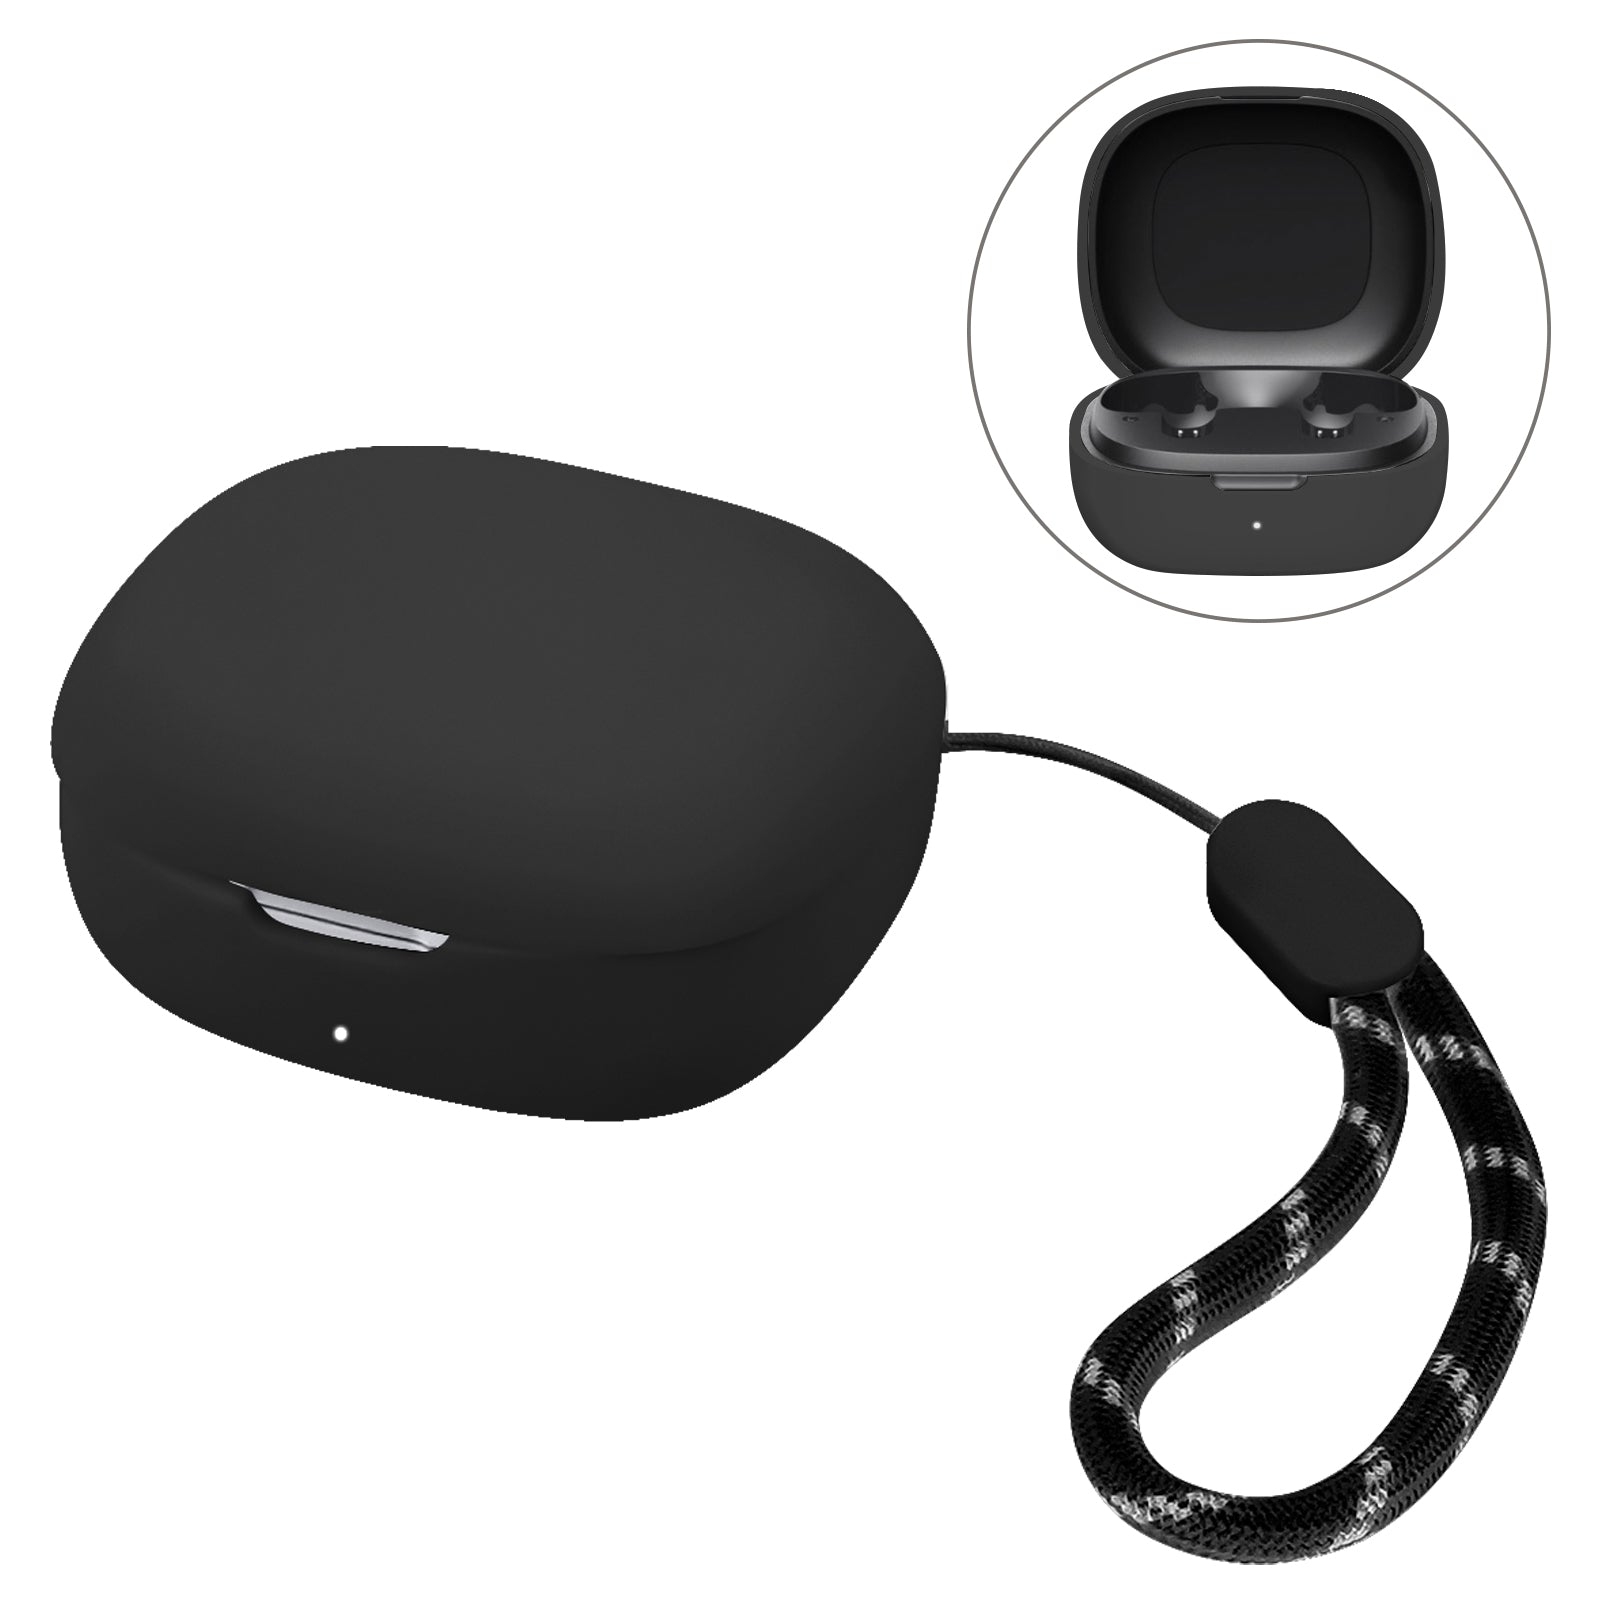 Wireless Headphone Protect Case Compatible for Anker-Soundcore